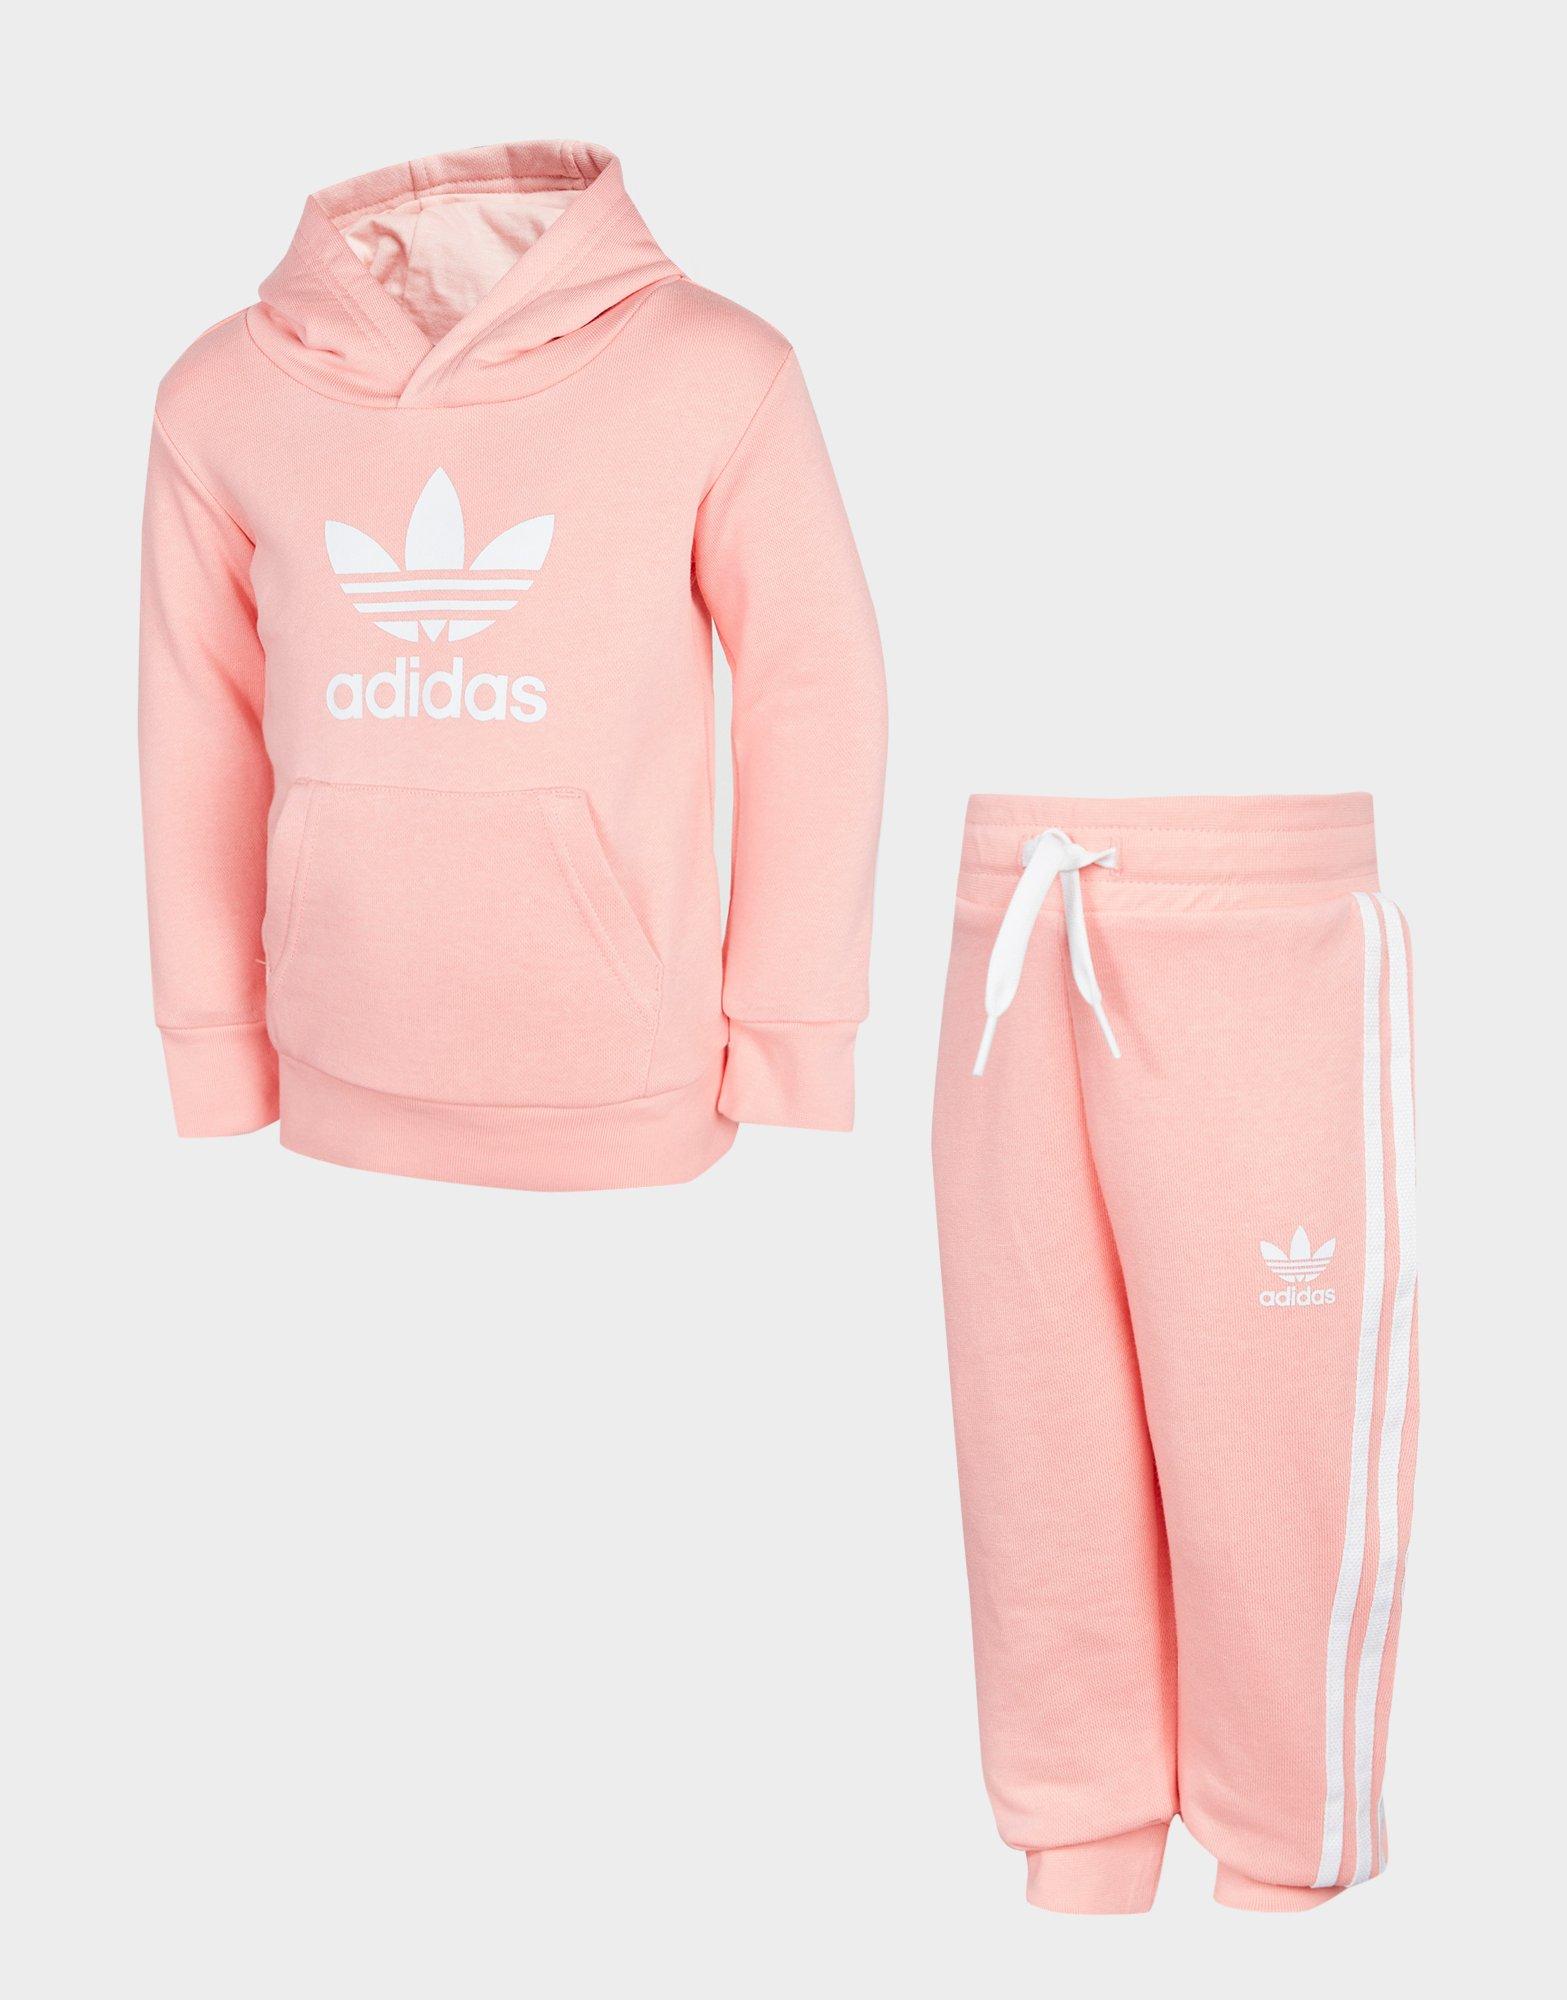 adidas jumpsuit for girls